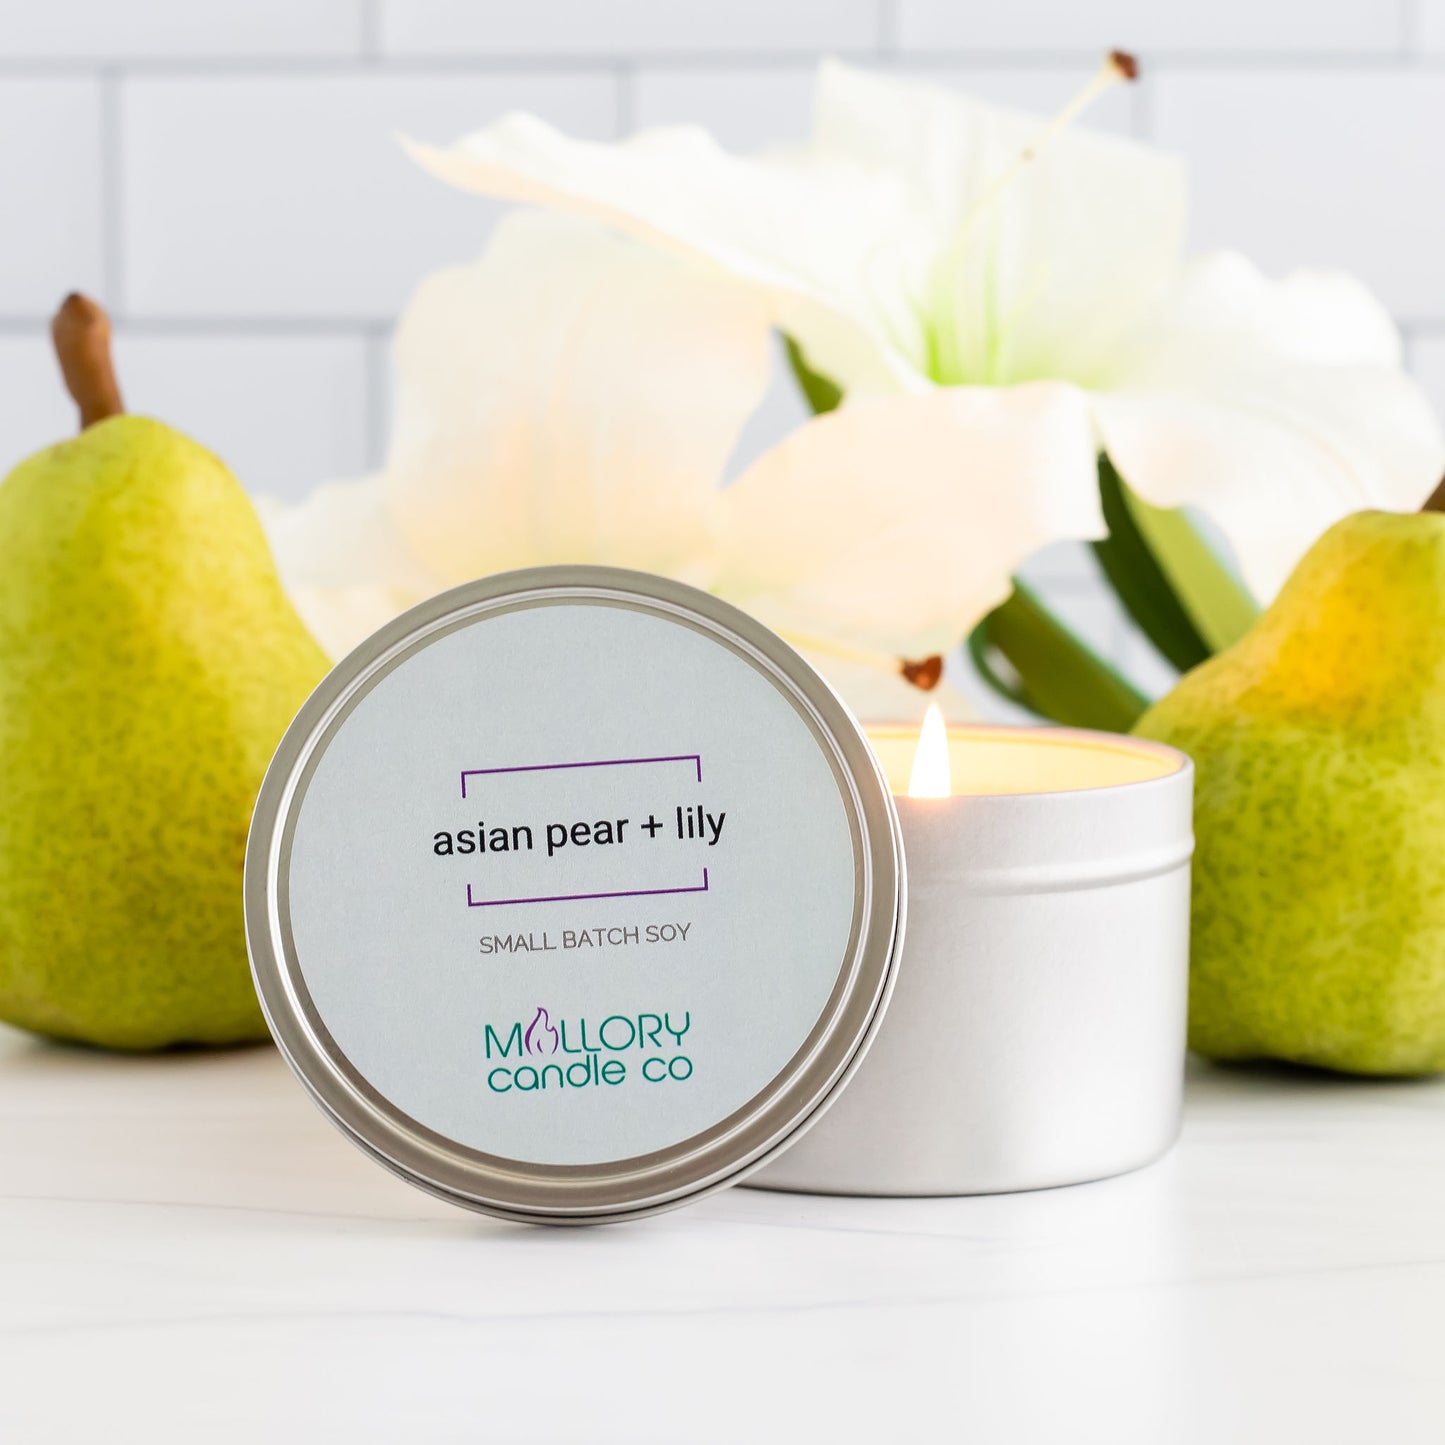 Asian Pear + Lily Candle, Large Tin